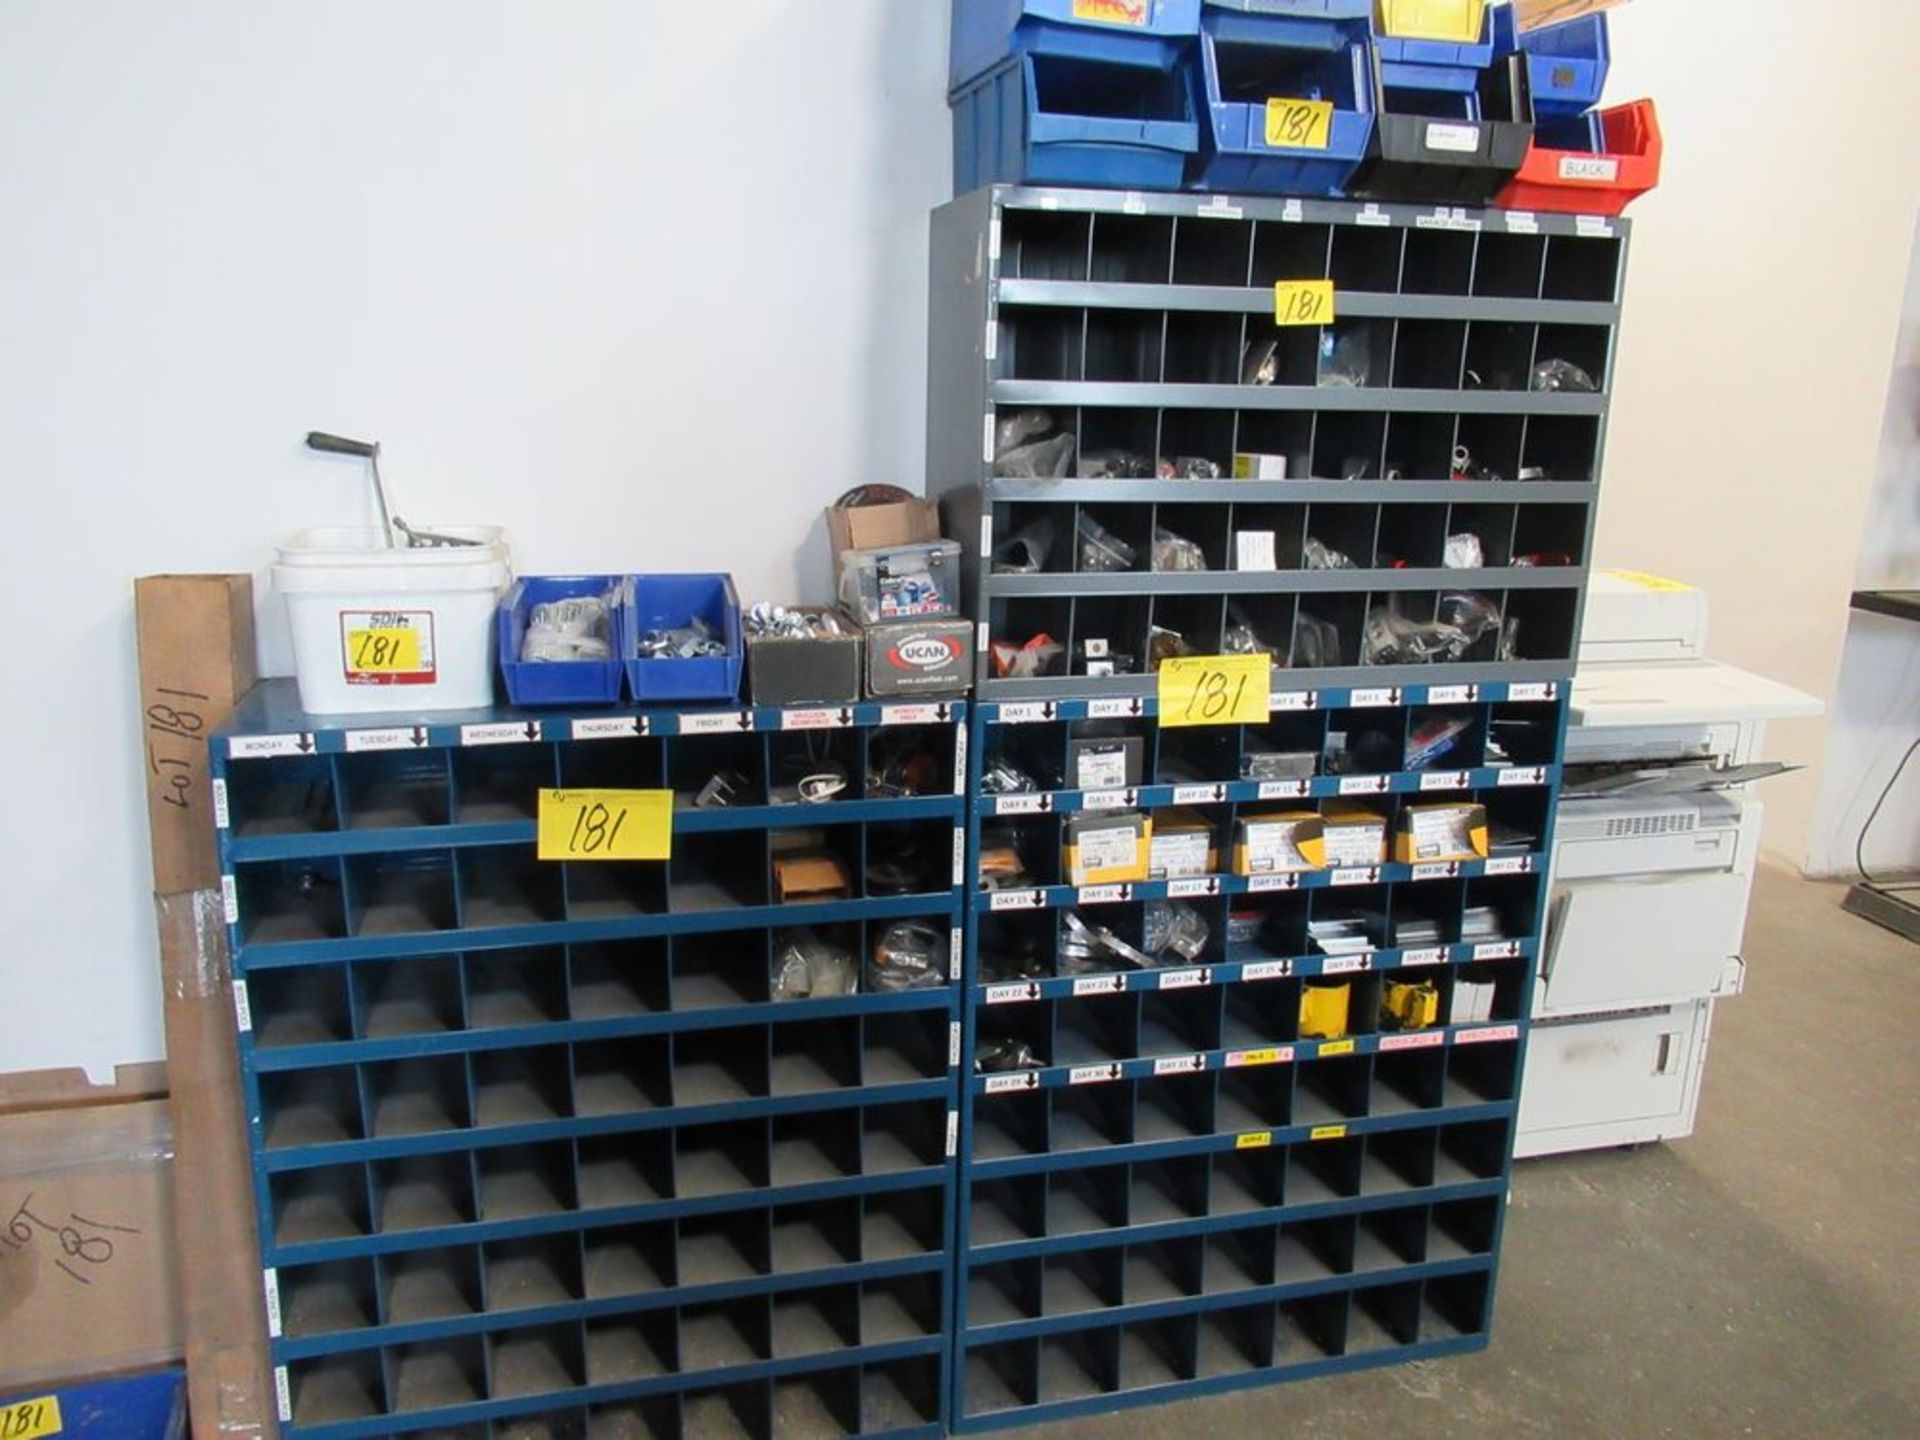 LOT ASST. BLUE PARTS BINS, W/ CONTENTS, BOLTS, NUTS, FASTENERS, ETC. - Image 2 of 3